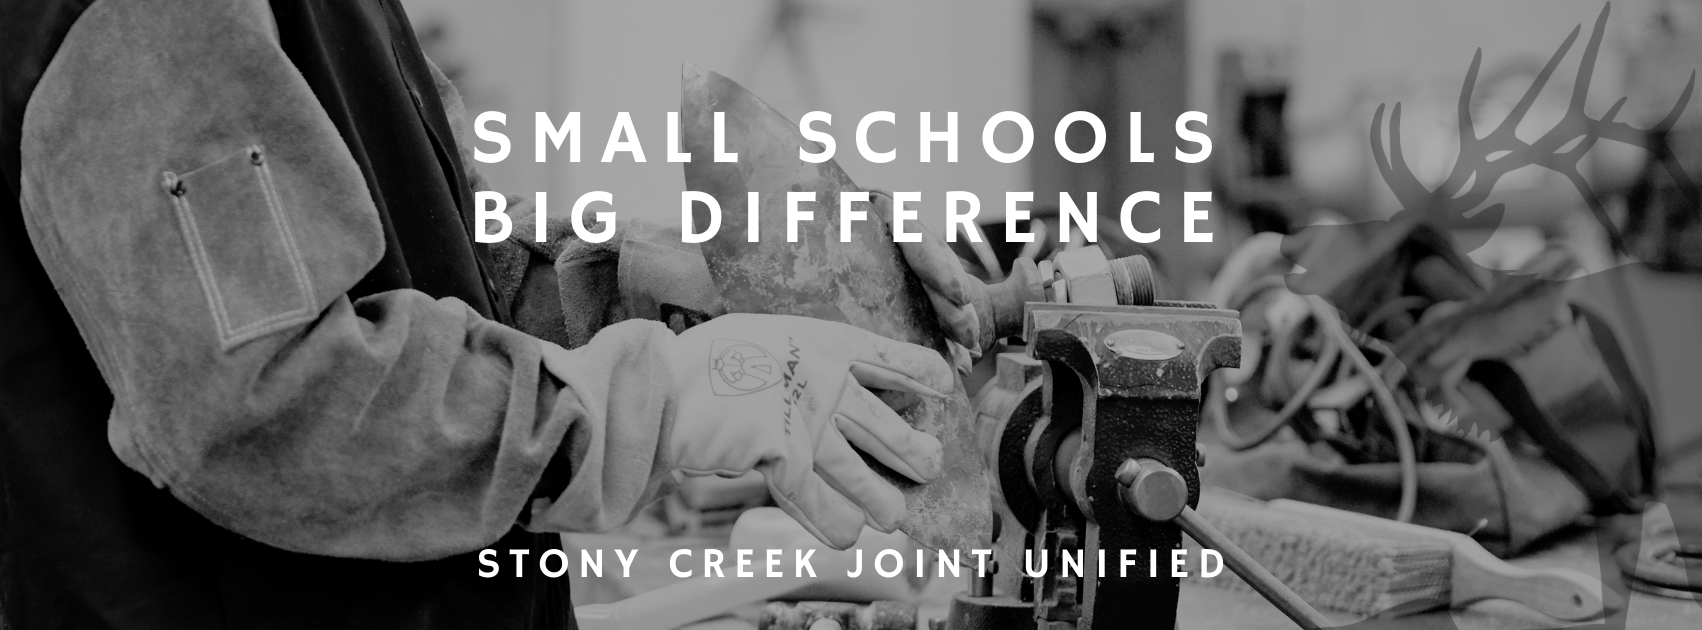 Small school, big difference.